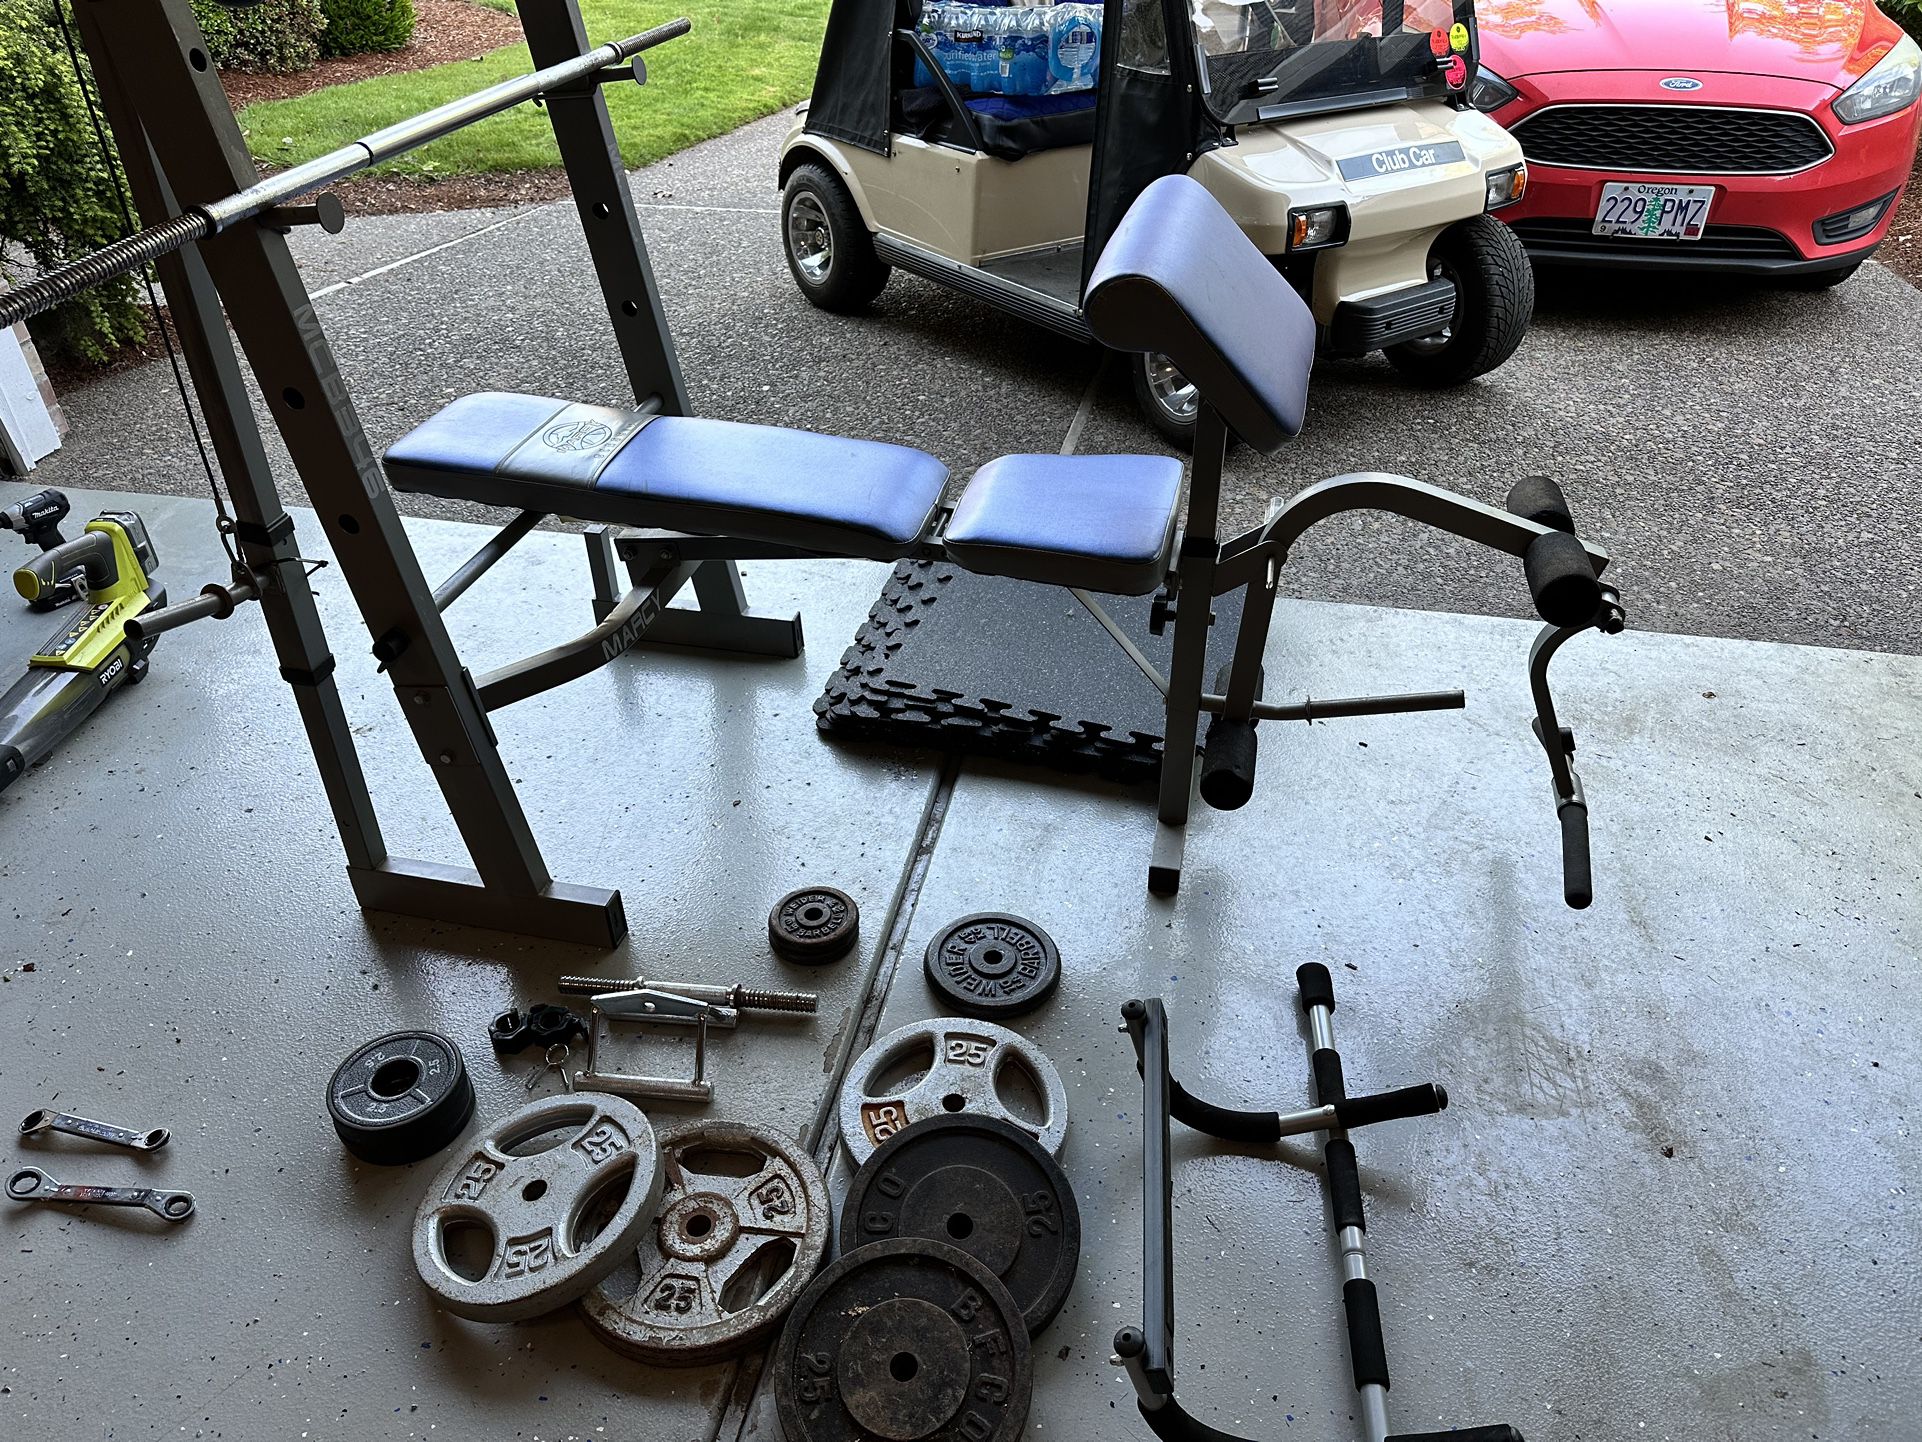 Full Gym Bench & Weights & Rubber Floor